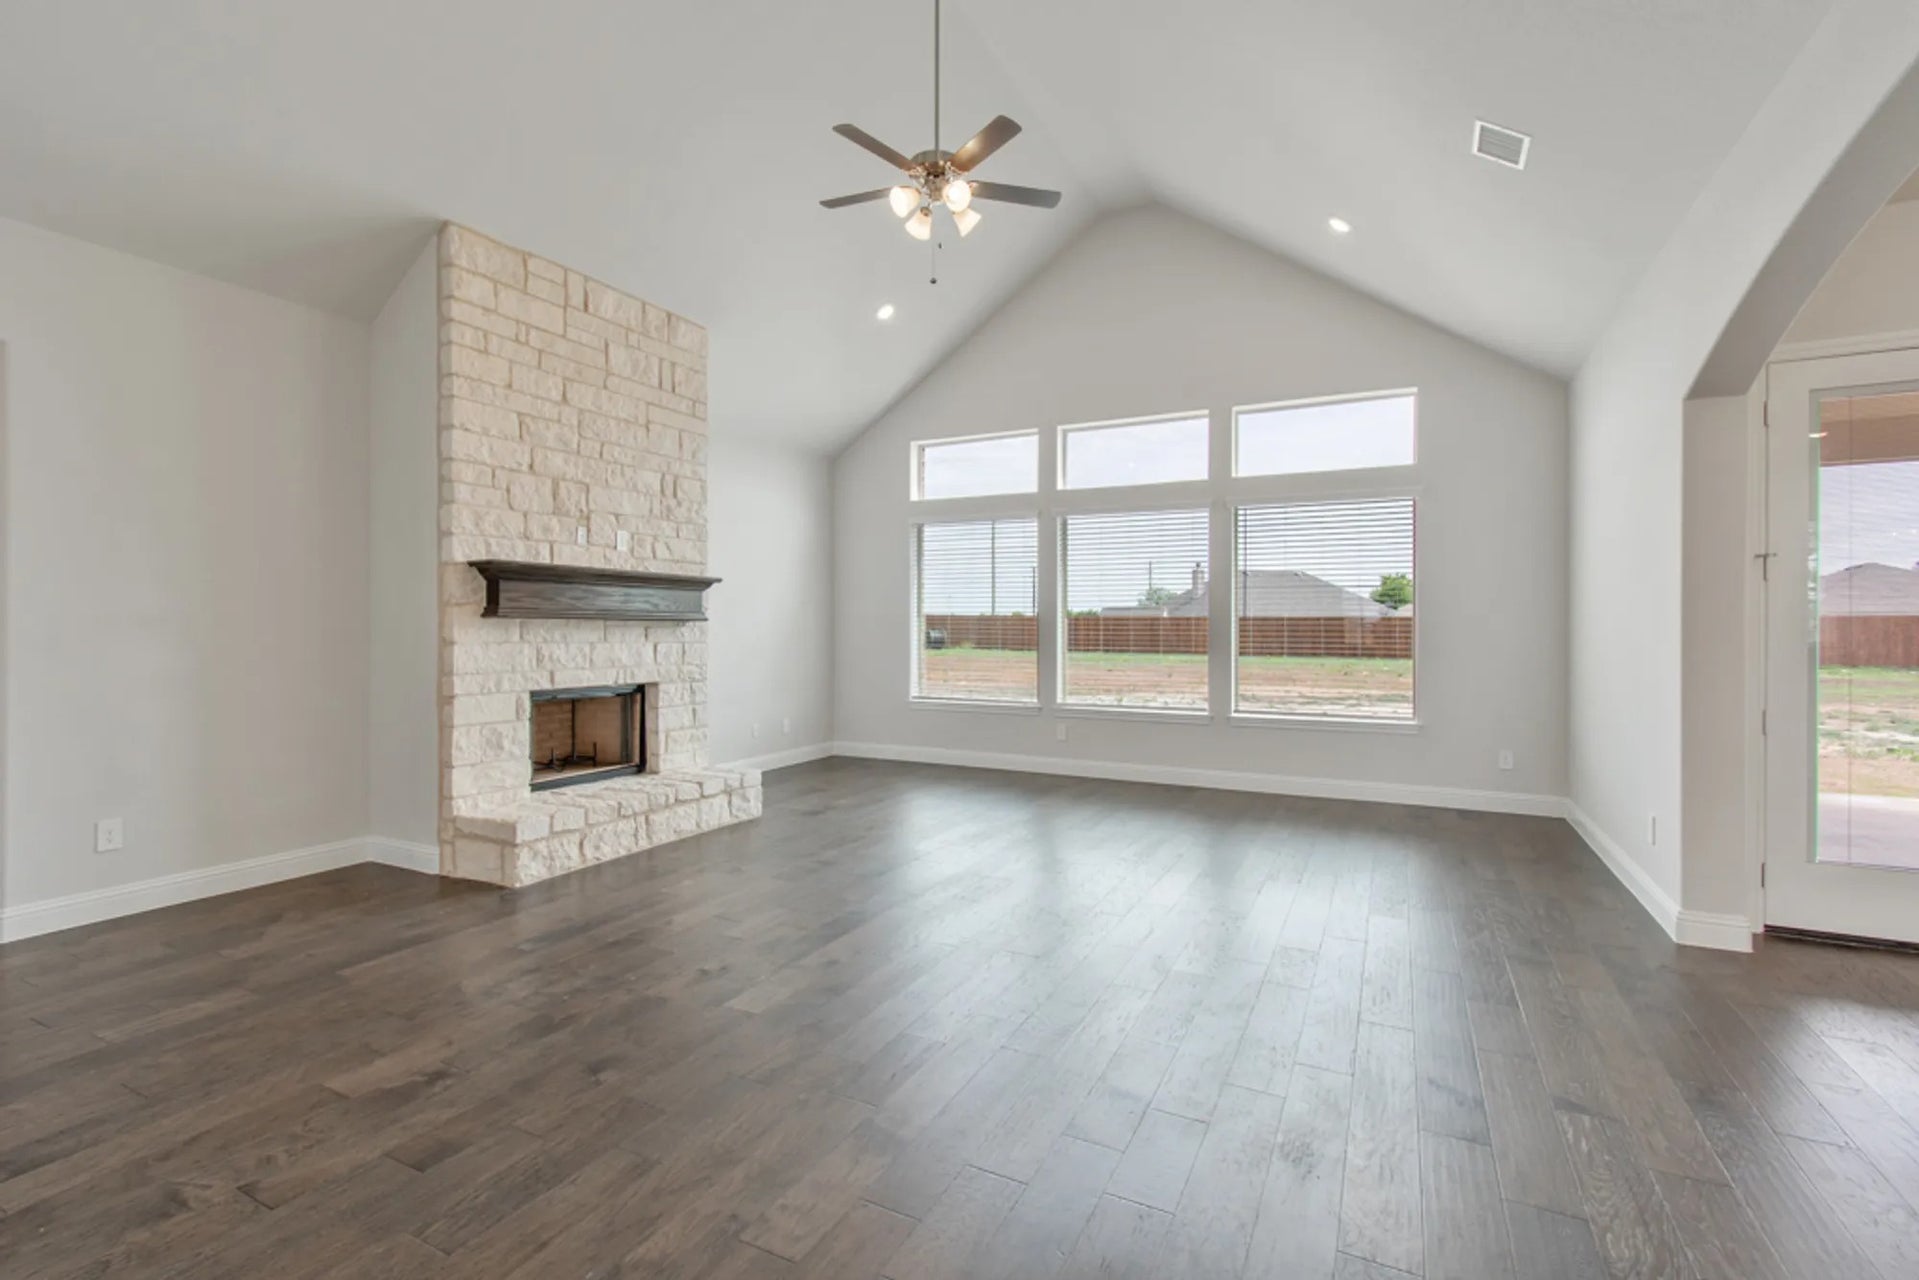 2,797sf New Home in New Fairview, TX